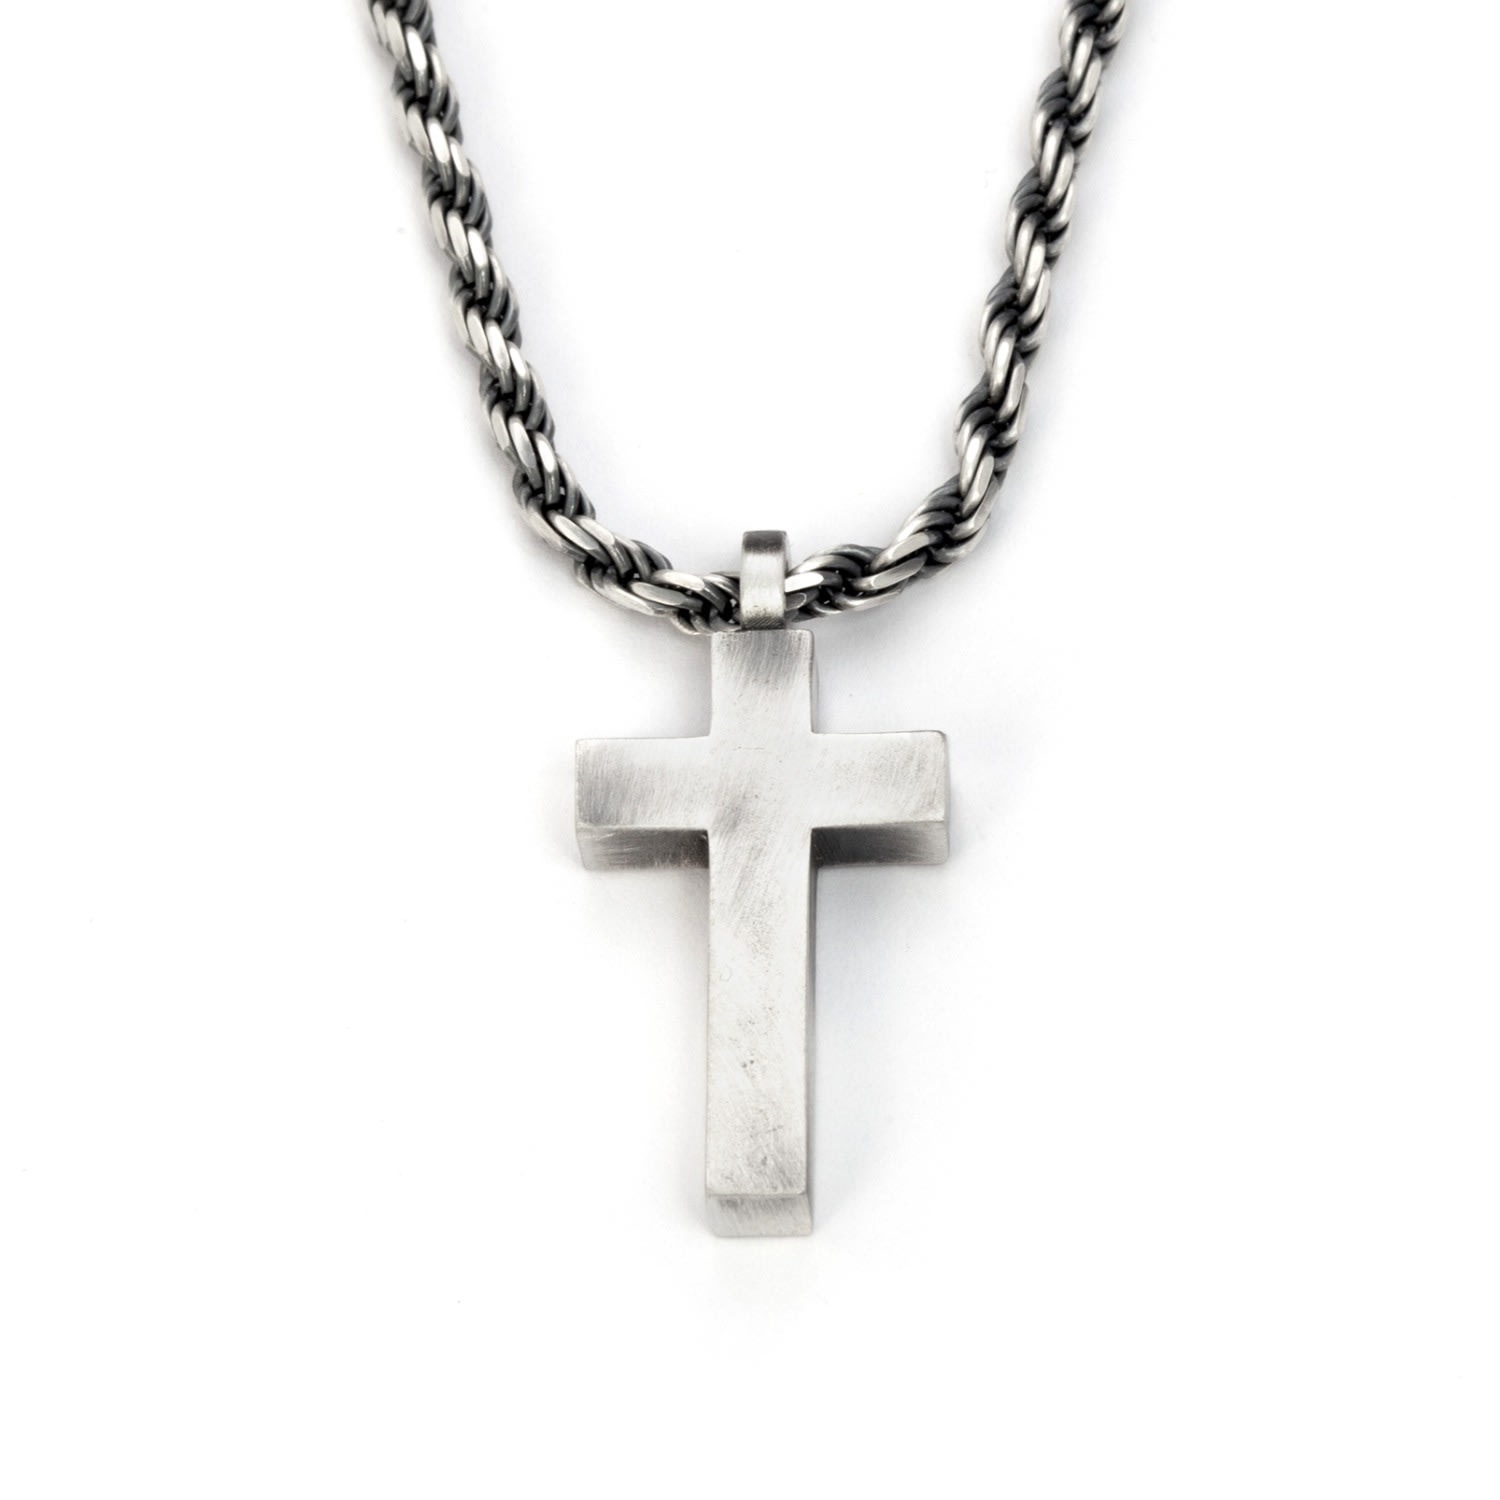 Silver / Grey Chunky Cross Chainnecklace Religious Gifts For Men Tomerm Jewelry